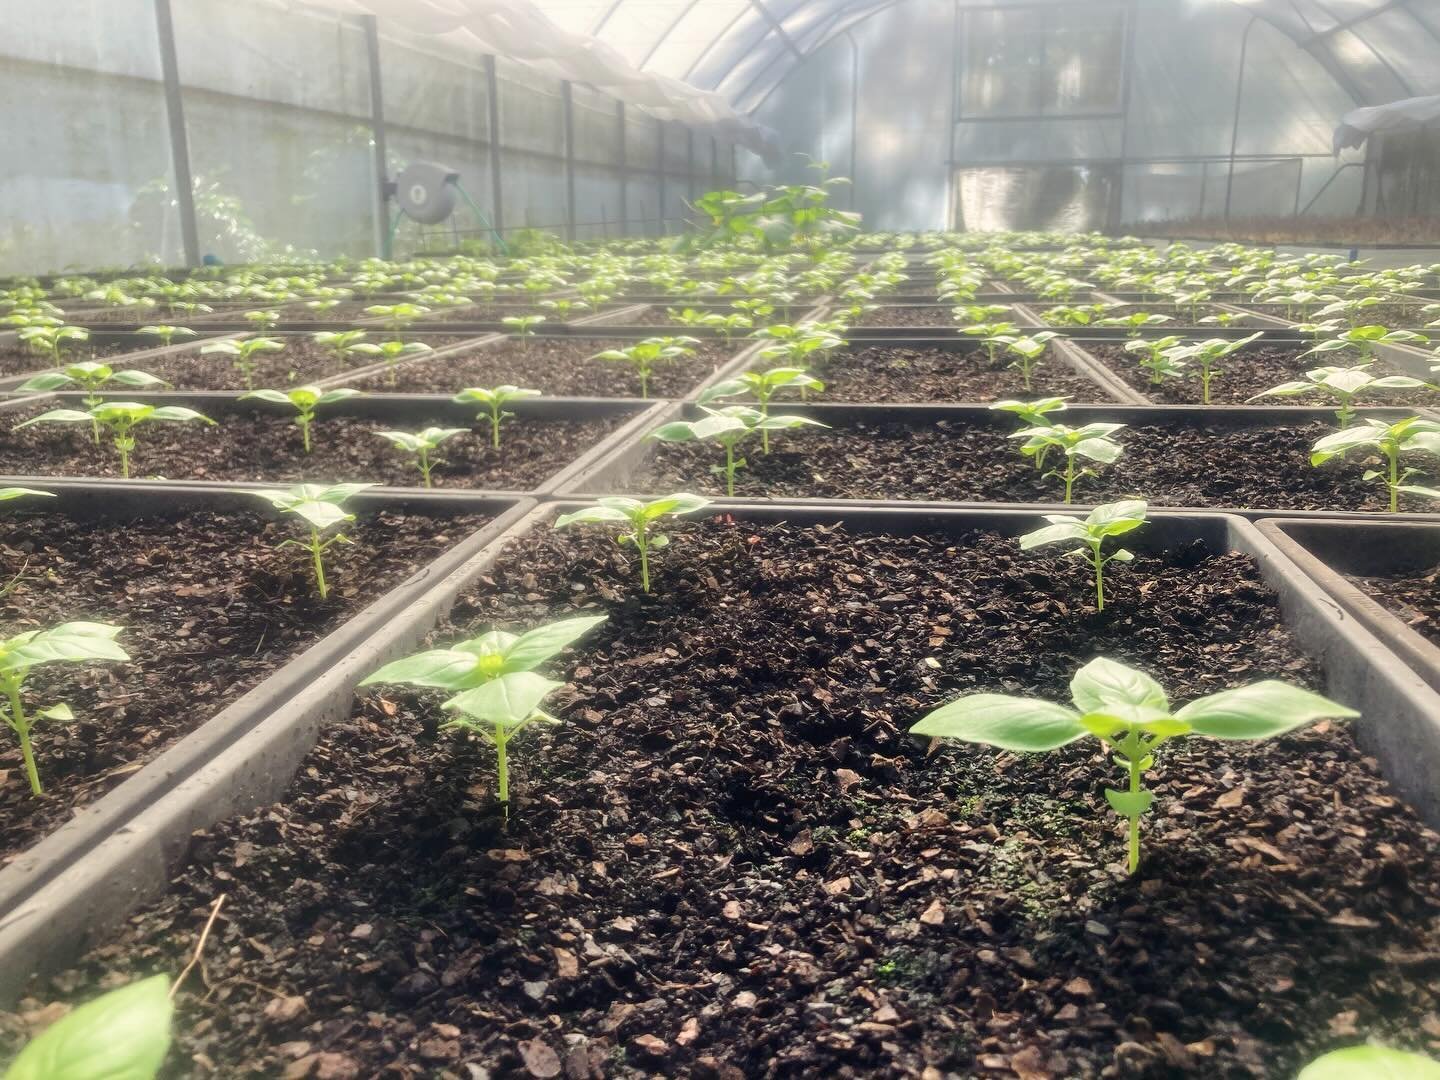 As the nights draw in and the rain continues basil seedlings are emerging. Season extension is the one of the major benefits of protected cropping. Riding on the shoulders of the season ensures you get the best return for your crop. By hitting the ma